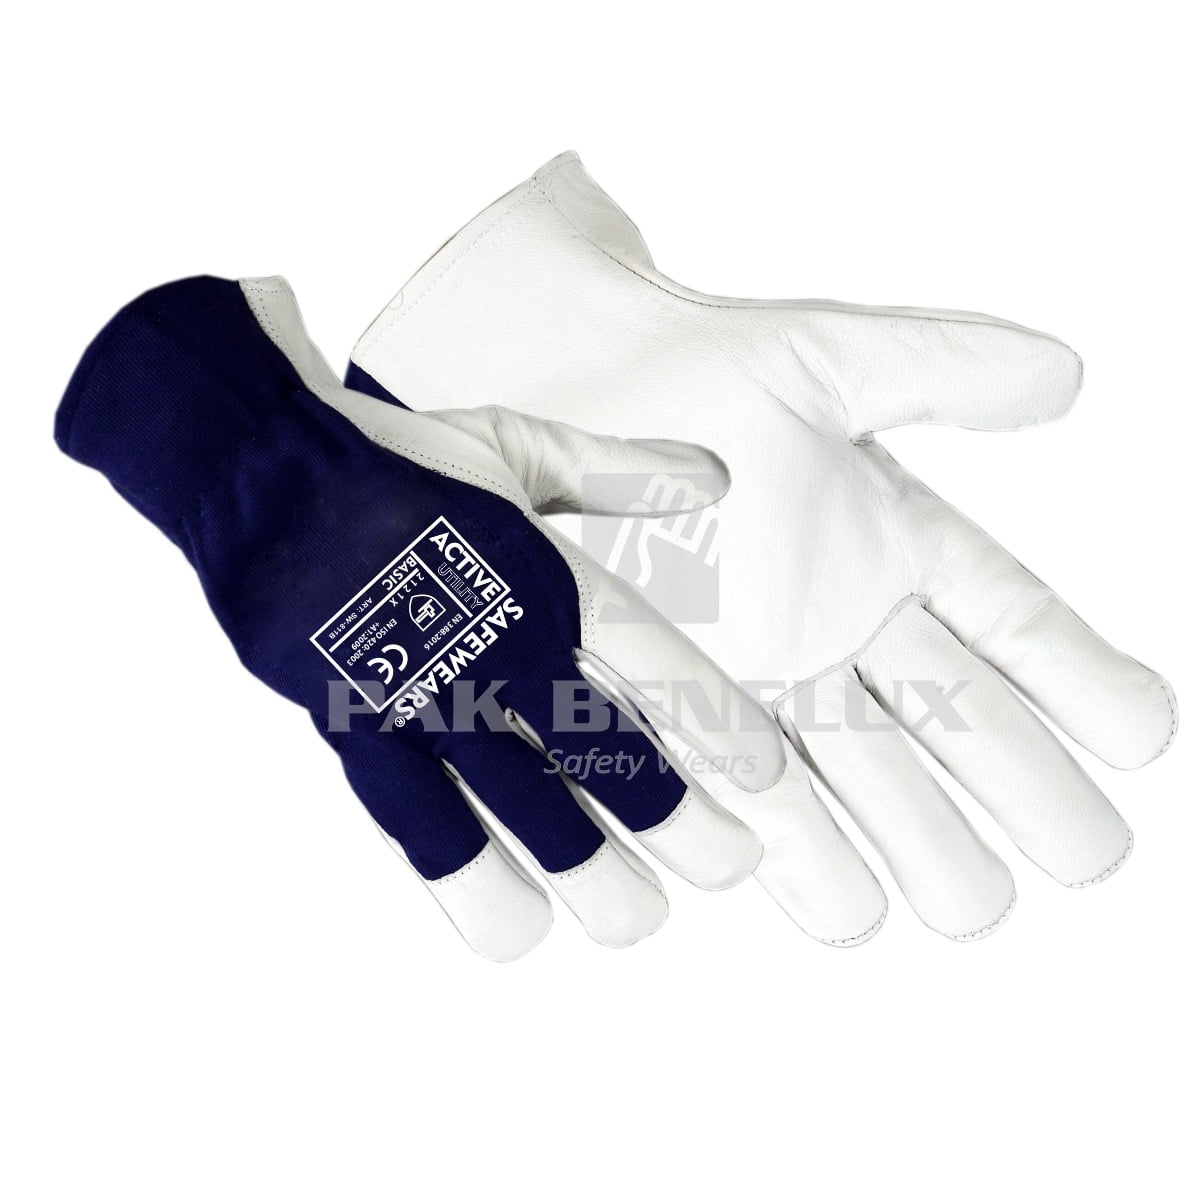 Assembly Gloves Manufacturer in Pakistan